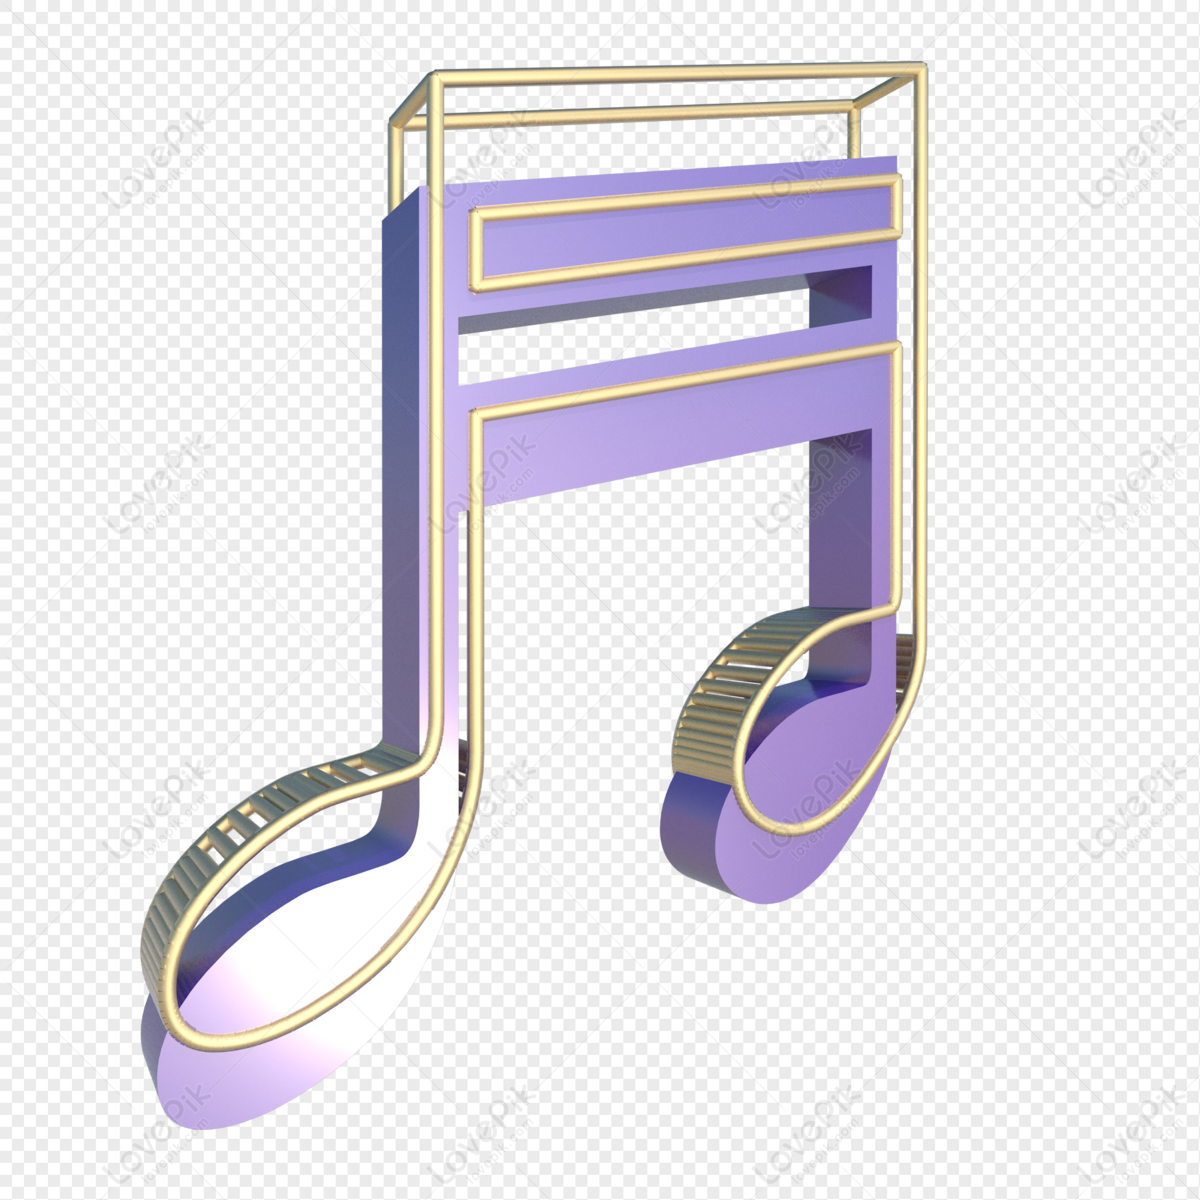 Music Symbol PNG Transparent Background And Clipart Image For Free Download  - Lovepik | 401336030